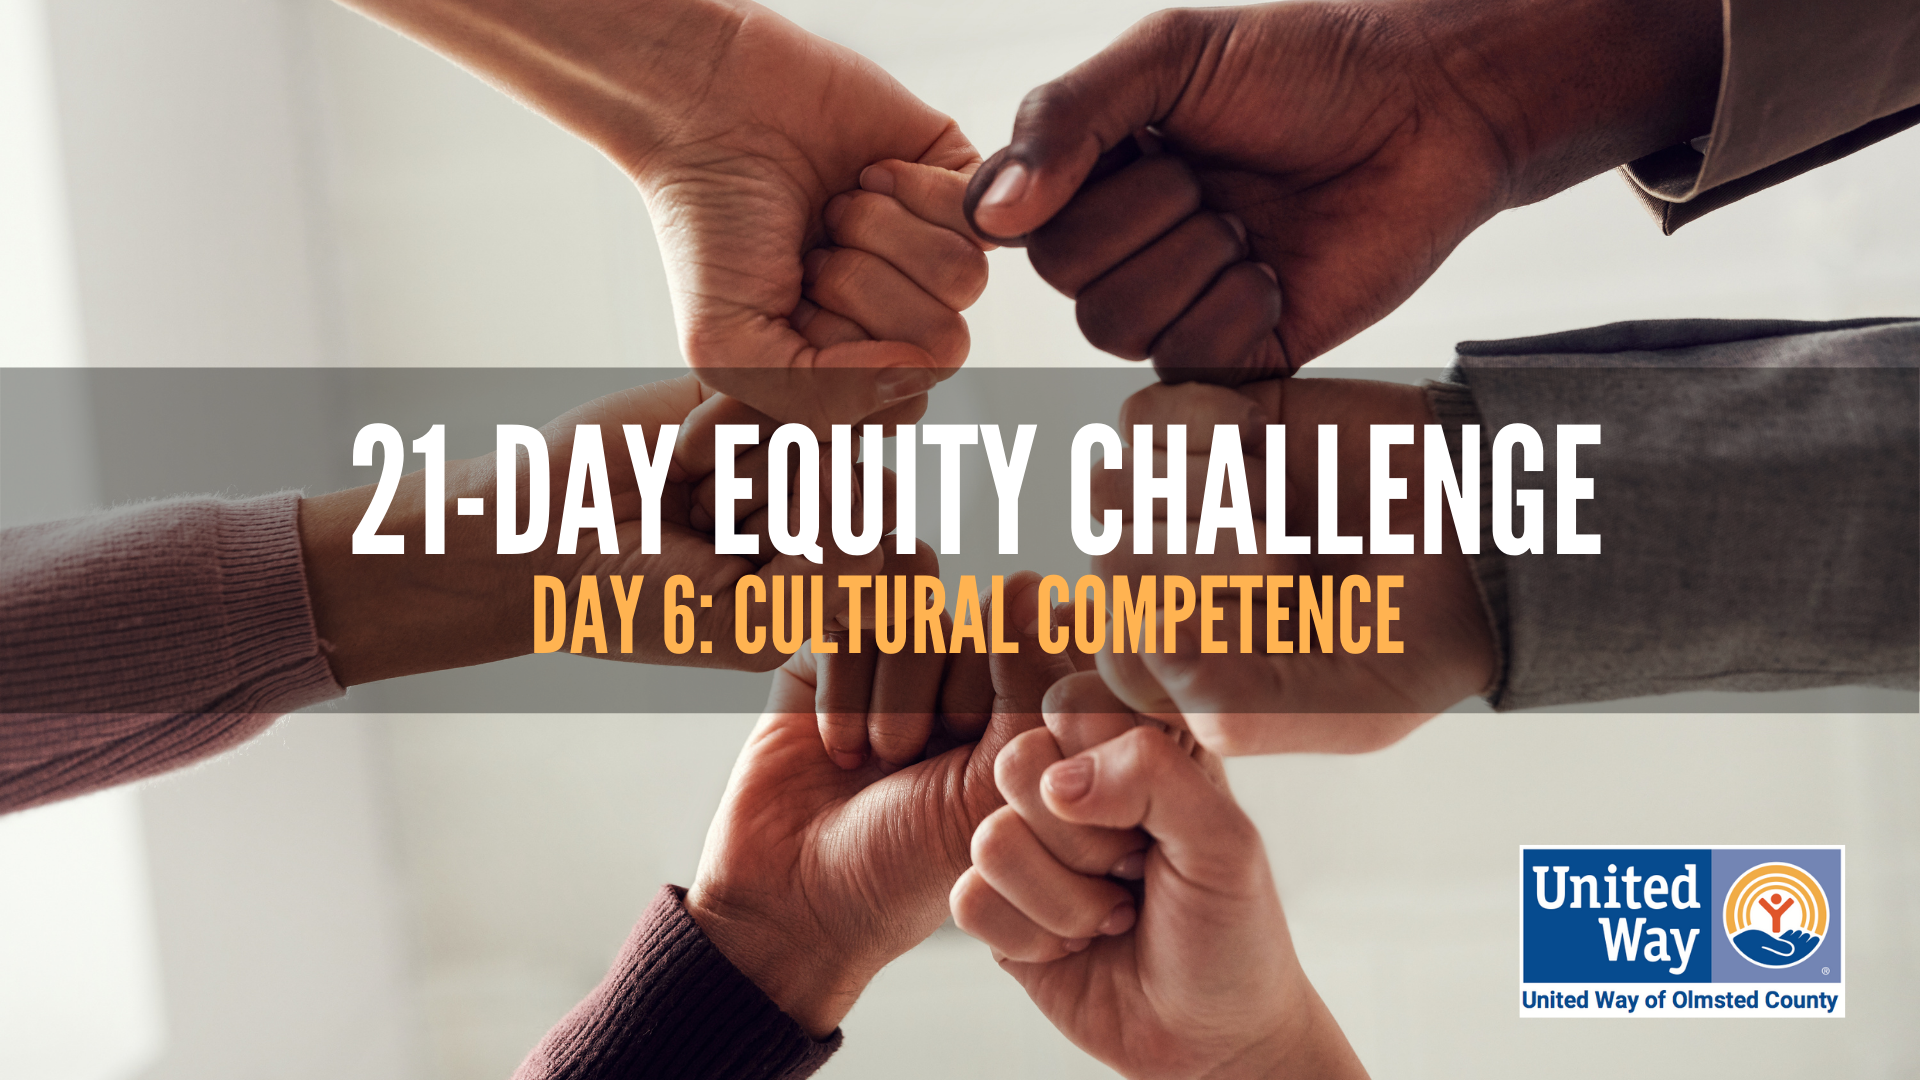 Day 6: Cultural Competence